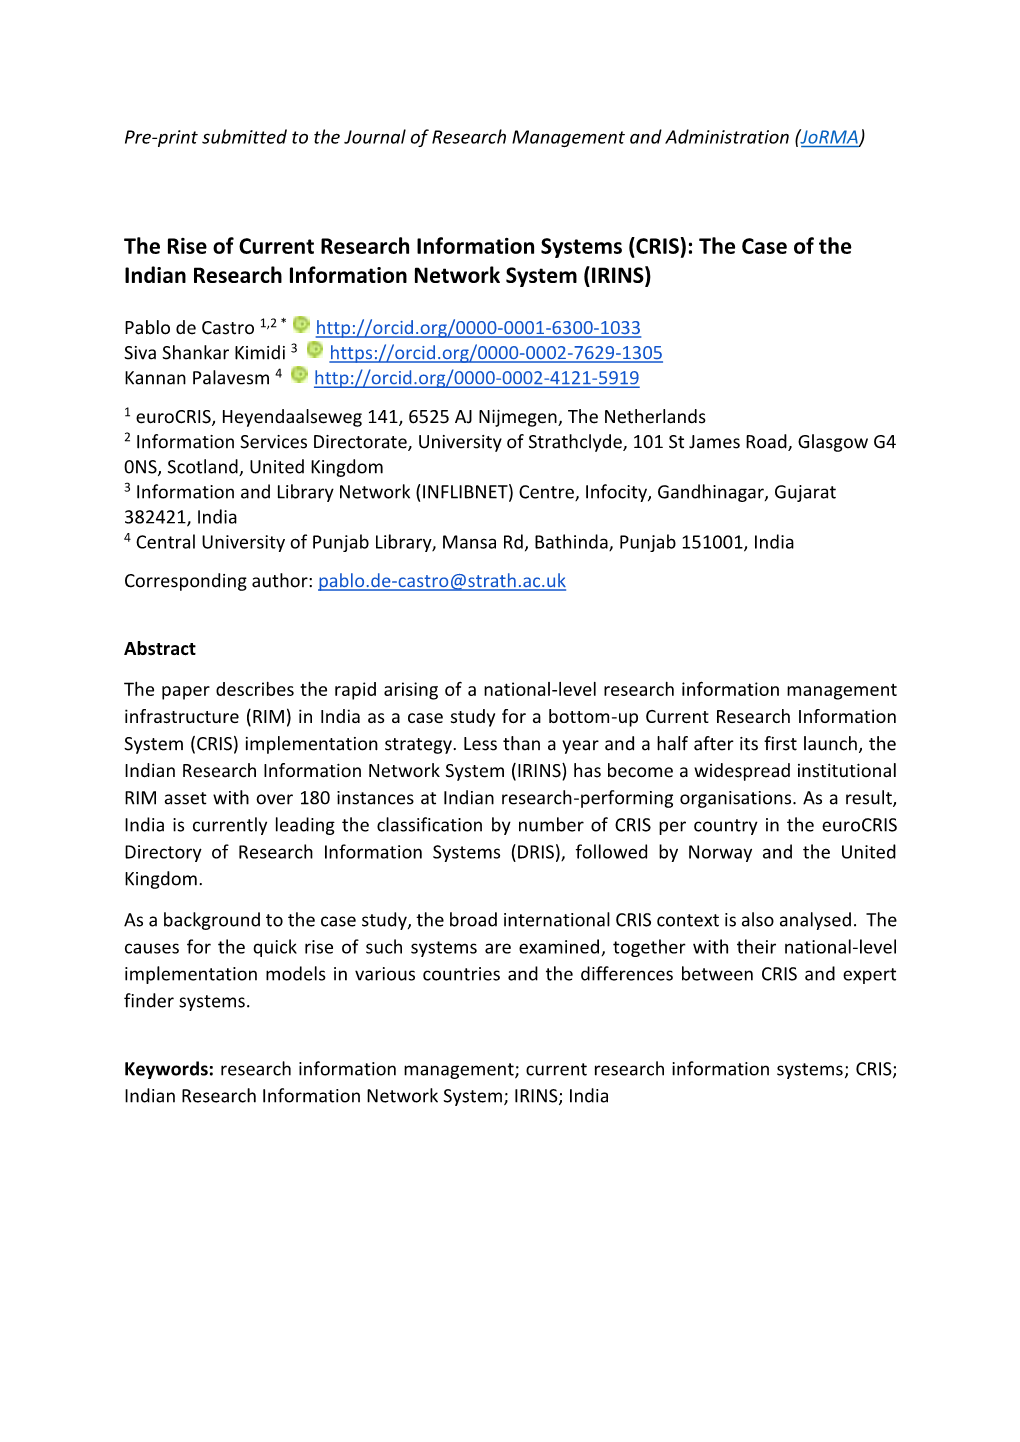 The Case of the Indian Research Information Network System (IRINS)